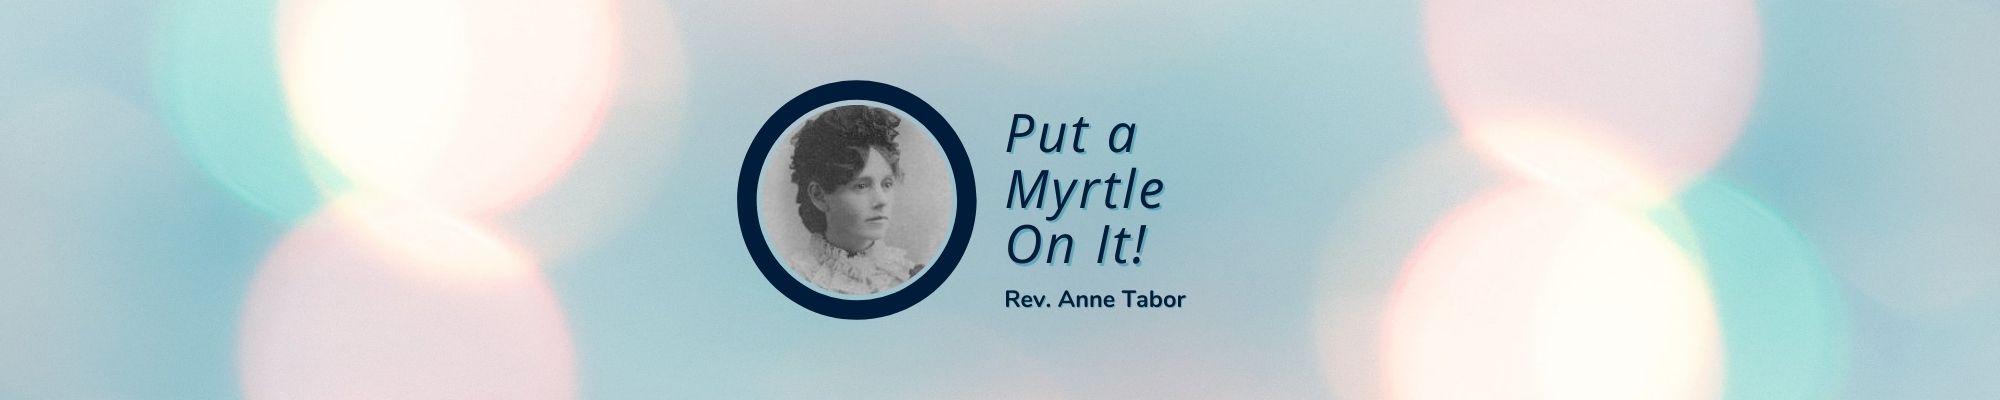 Put a Myrtle On it Inspiration Unity Teachings Podcast